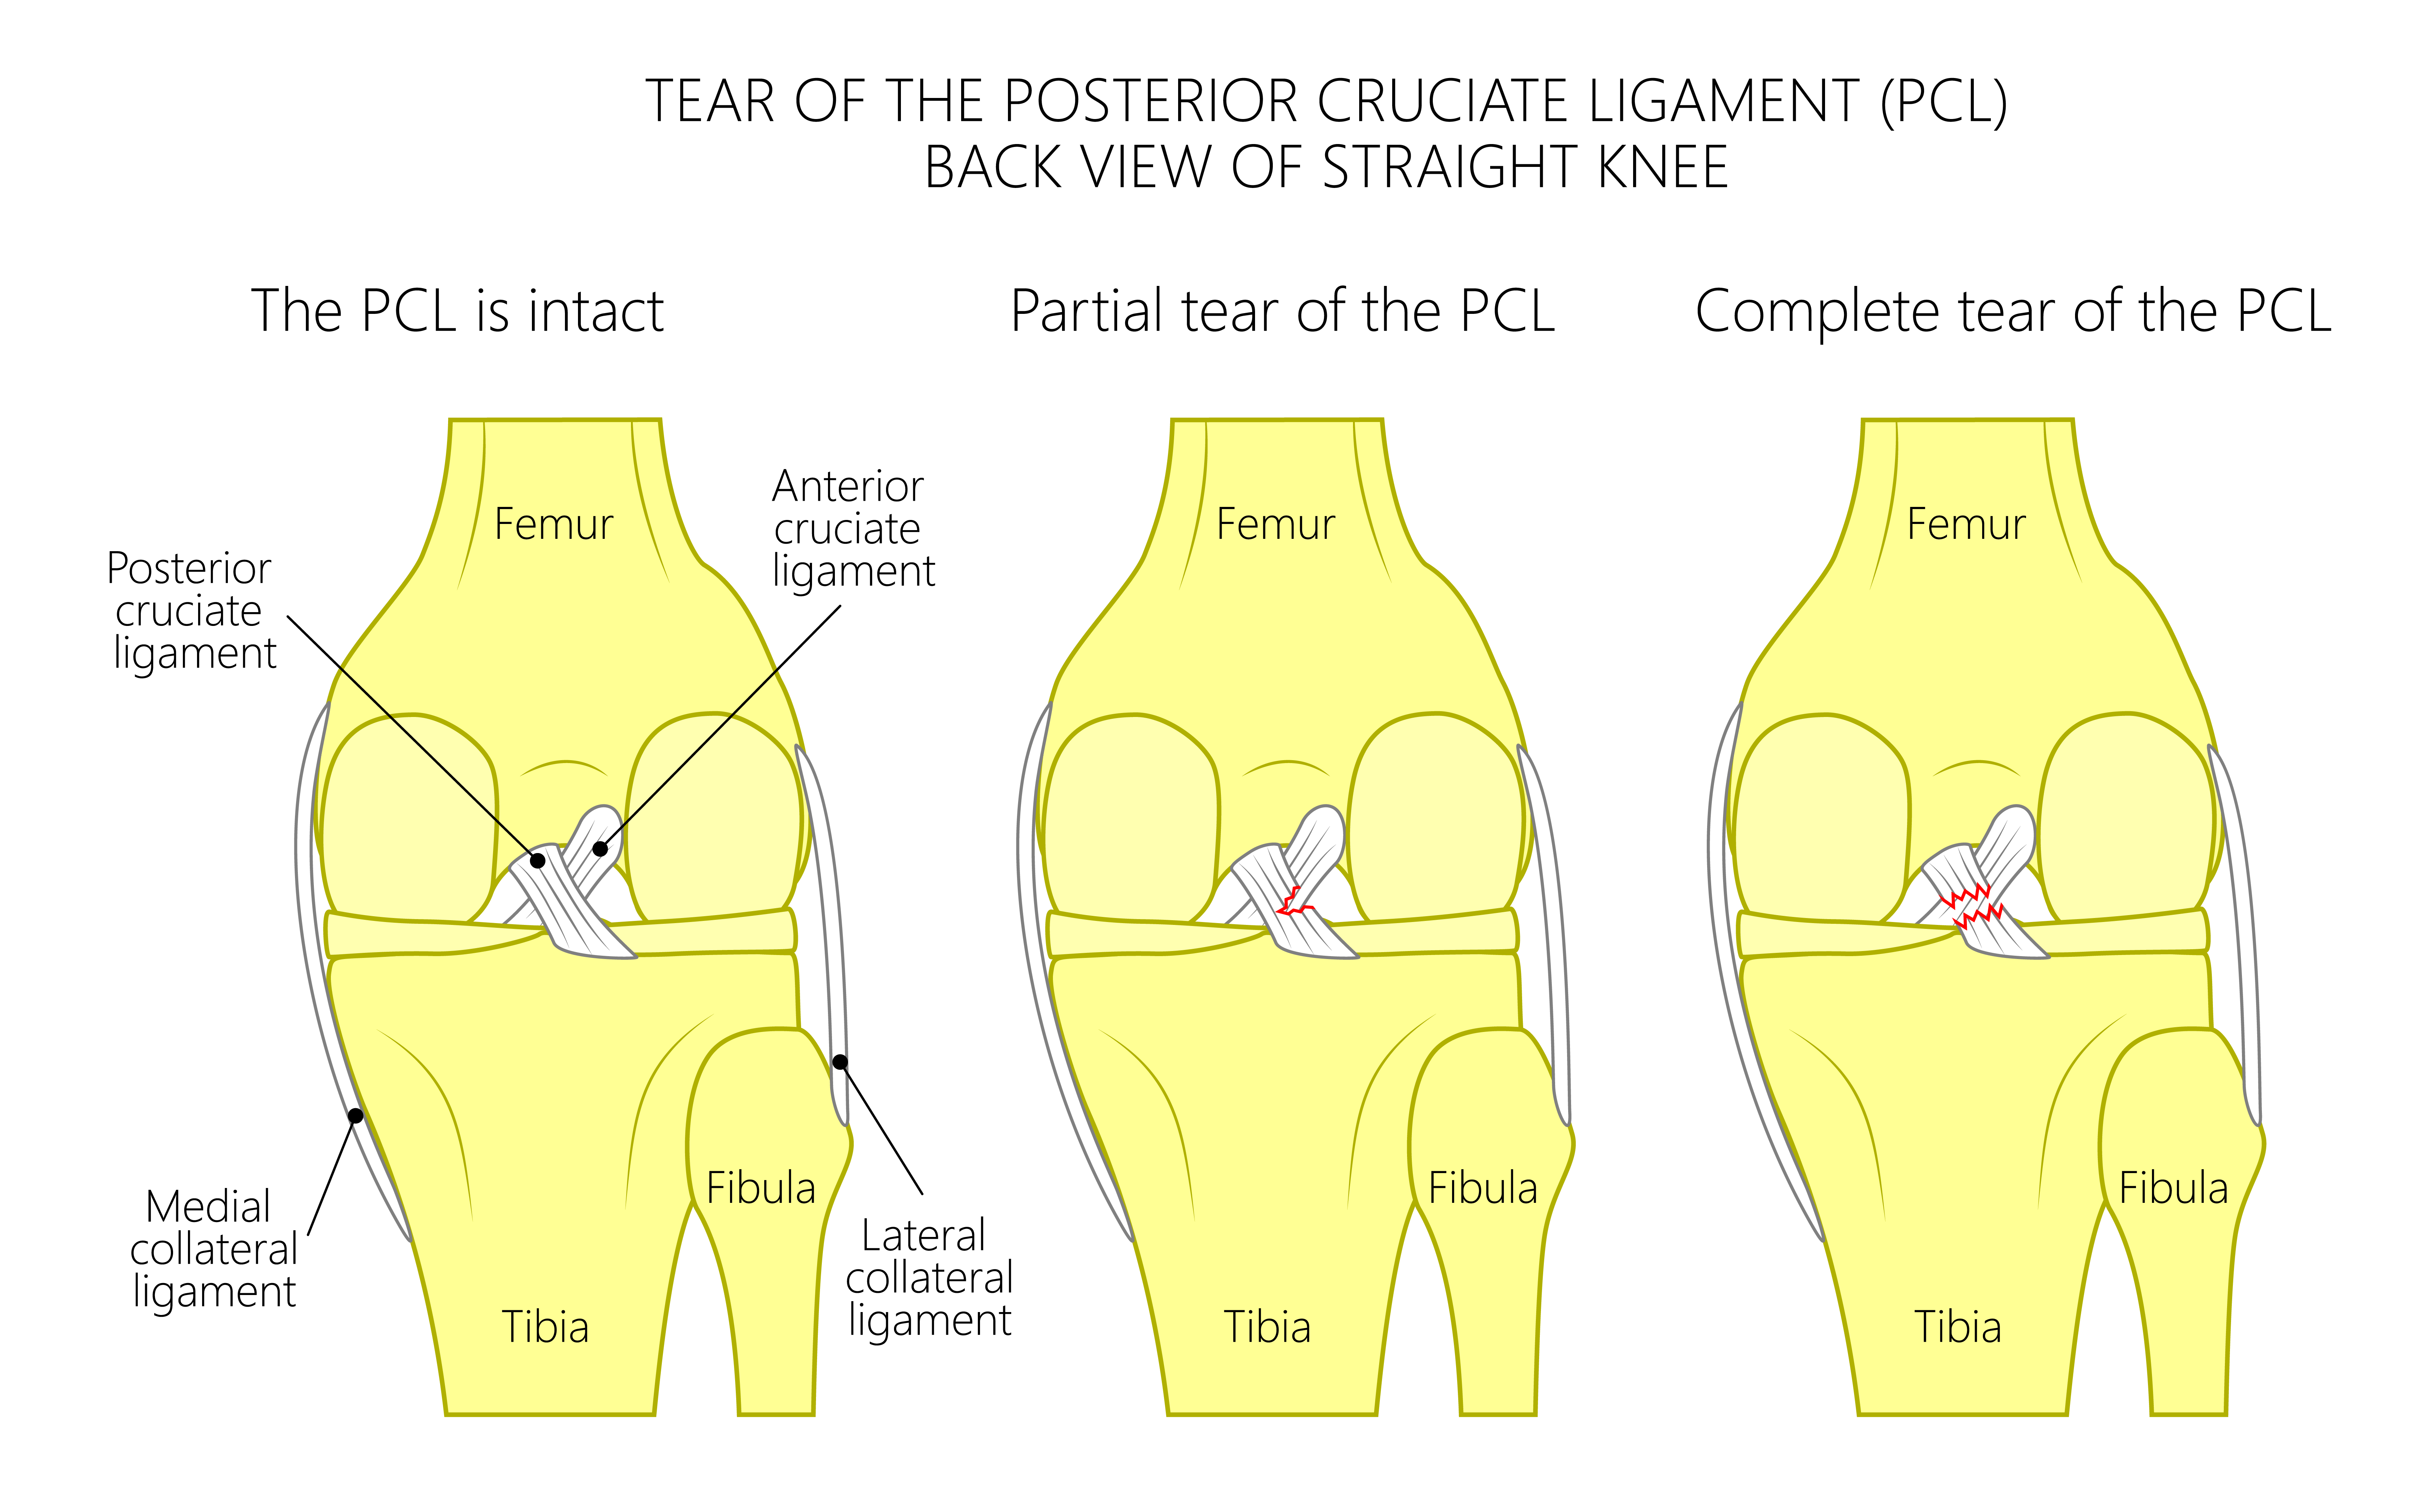 Posterior Cruciate Ligament Injury - What You Need to Know